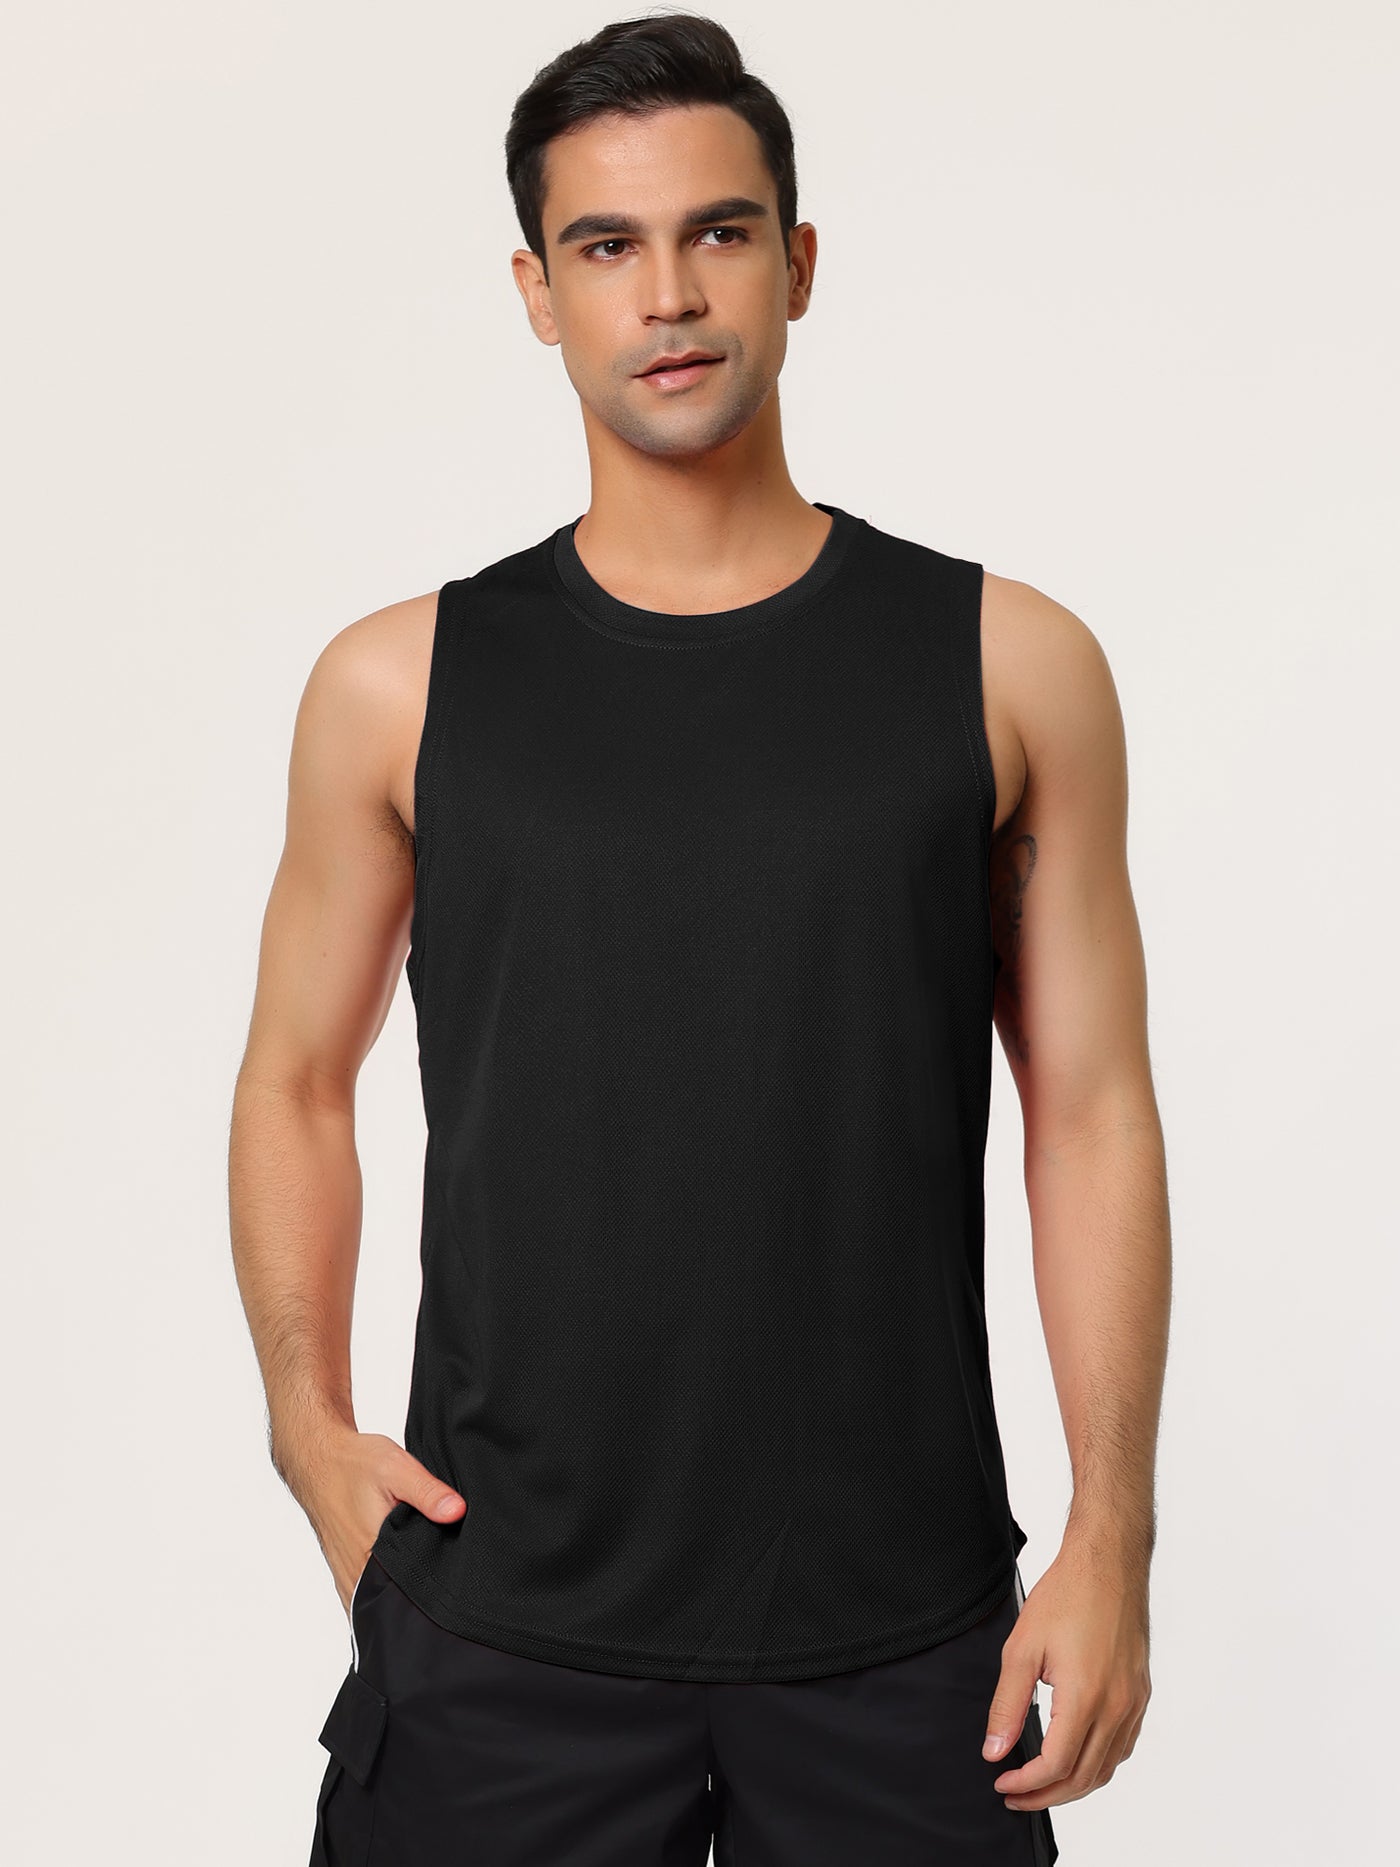 Bublédon Gym Tank Tops for Men's Sleeveless Fitness Muscle Sport Workout T-Shirts